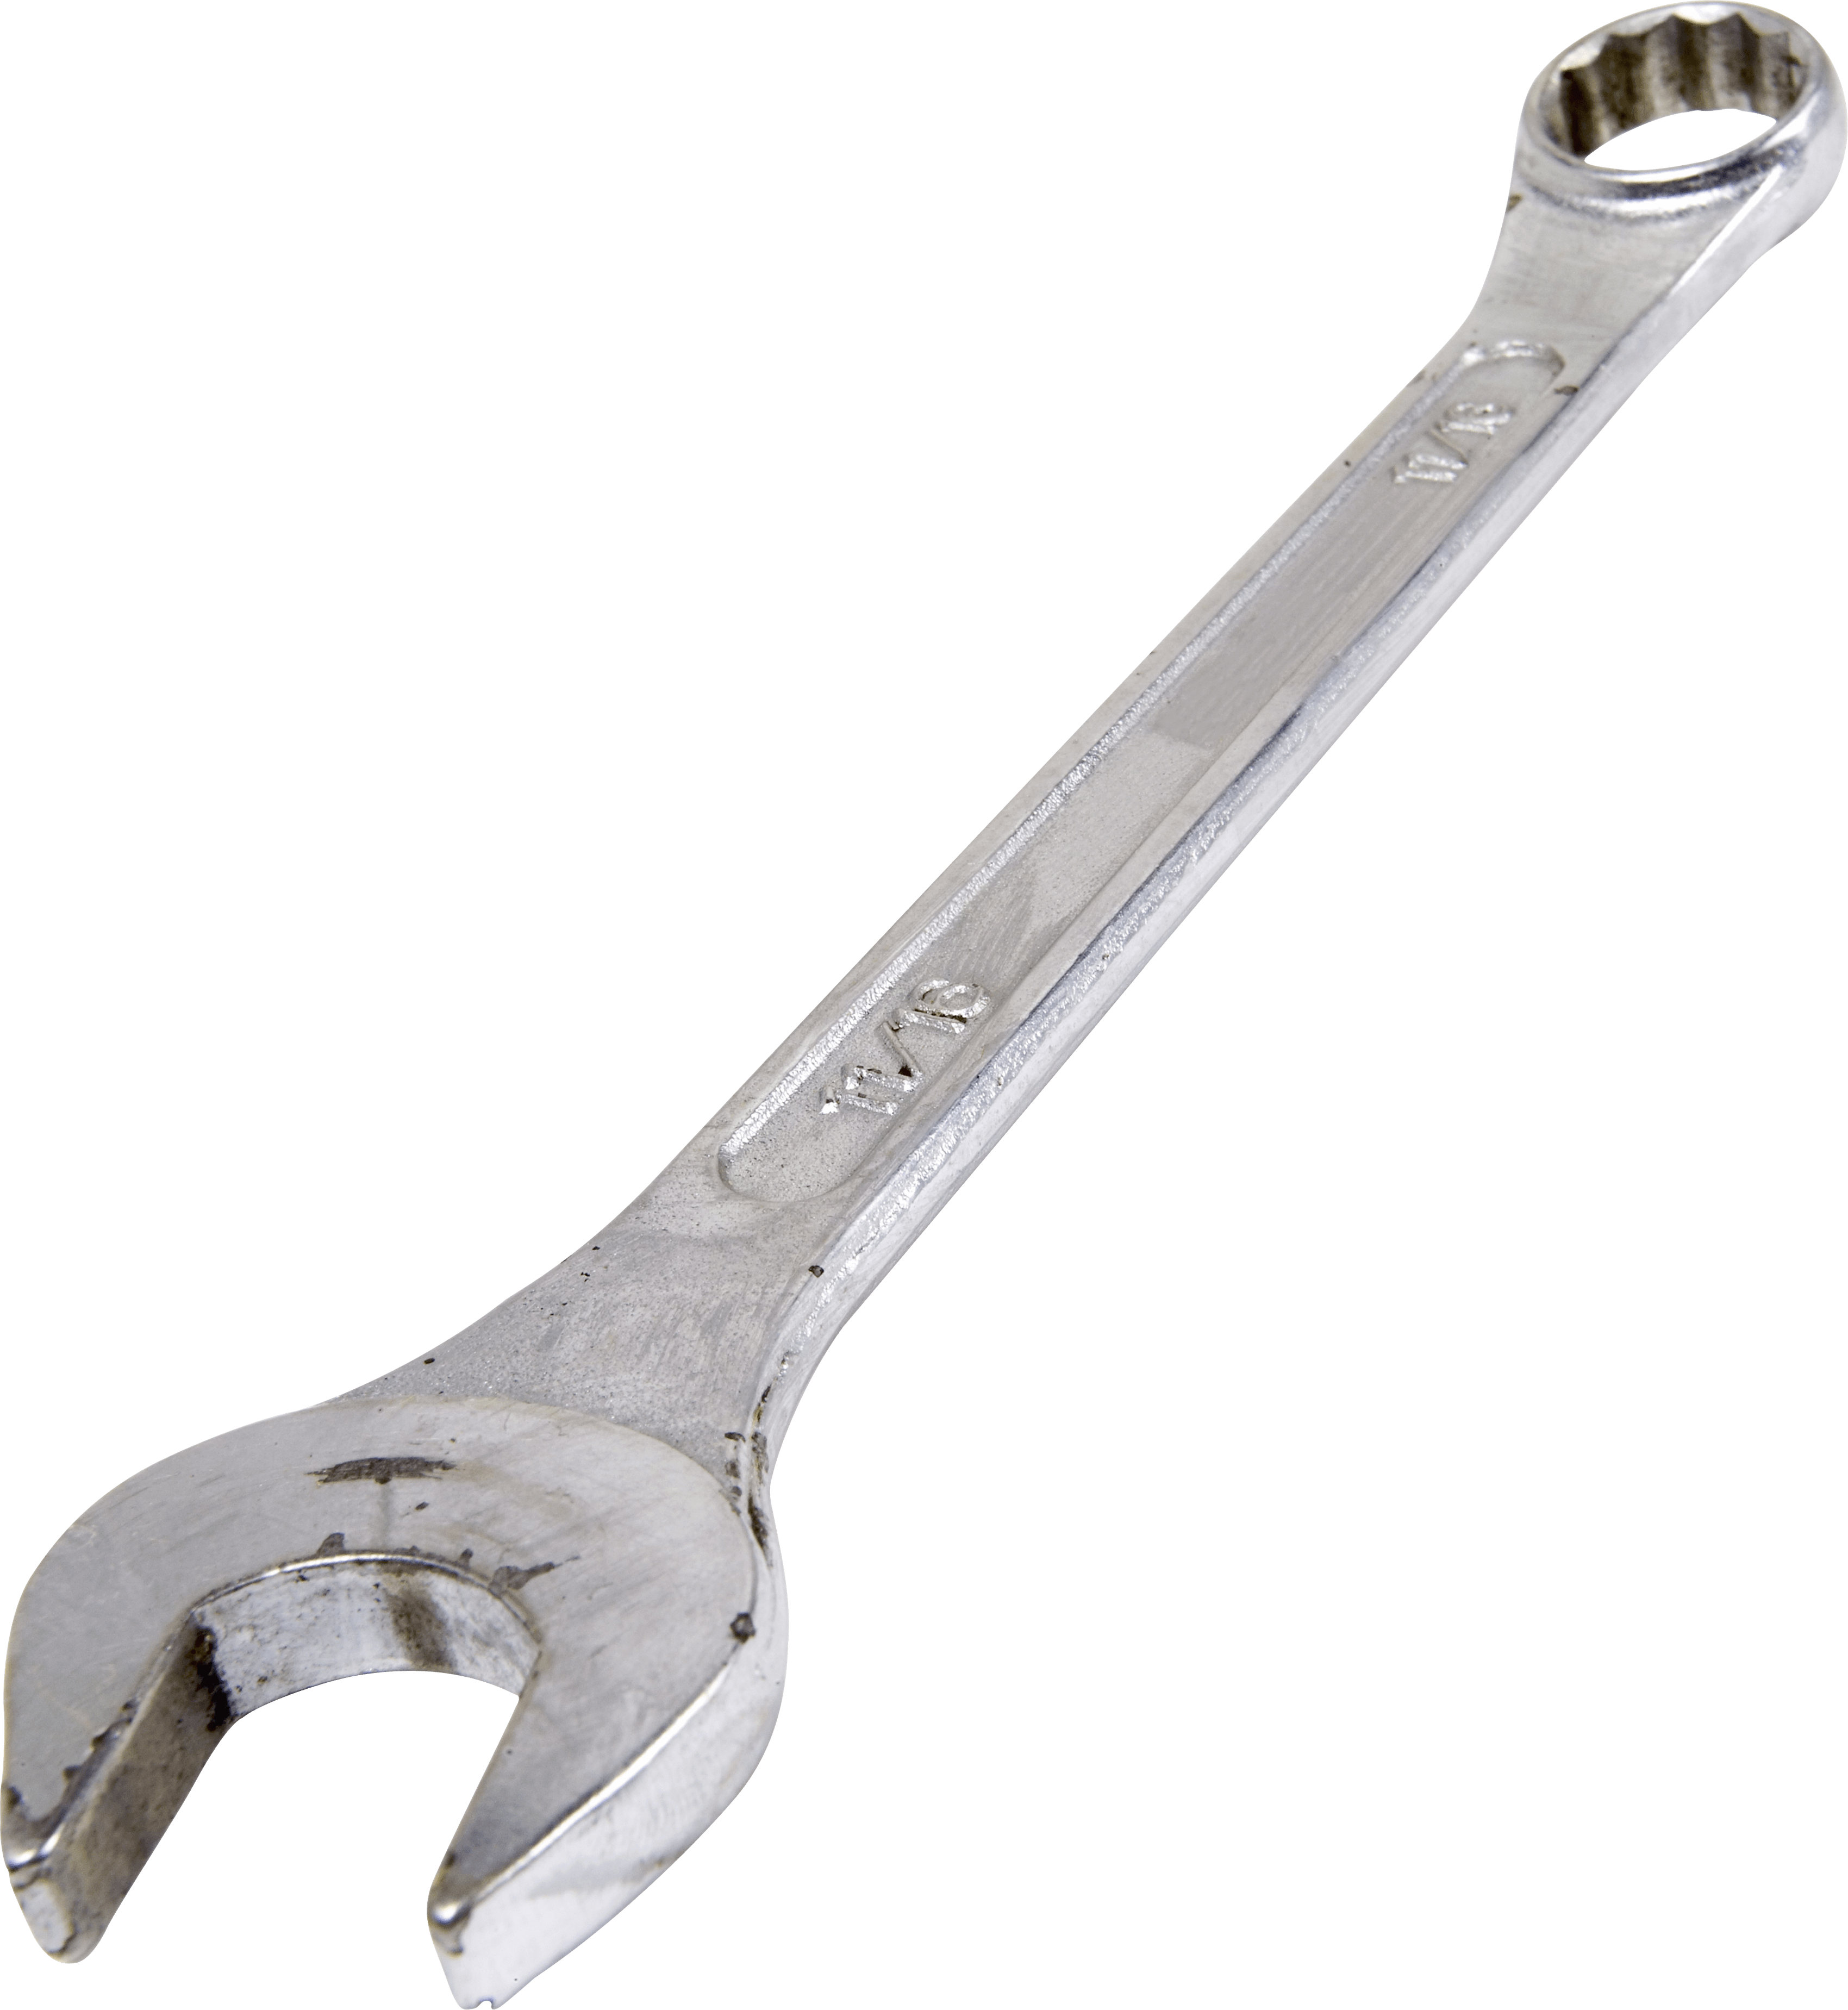 Wrench Spanner Png Image PNG Image